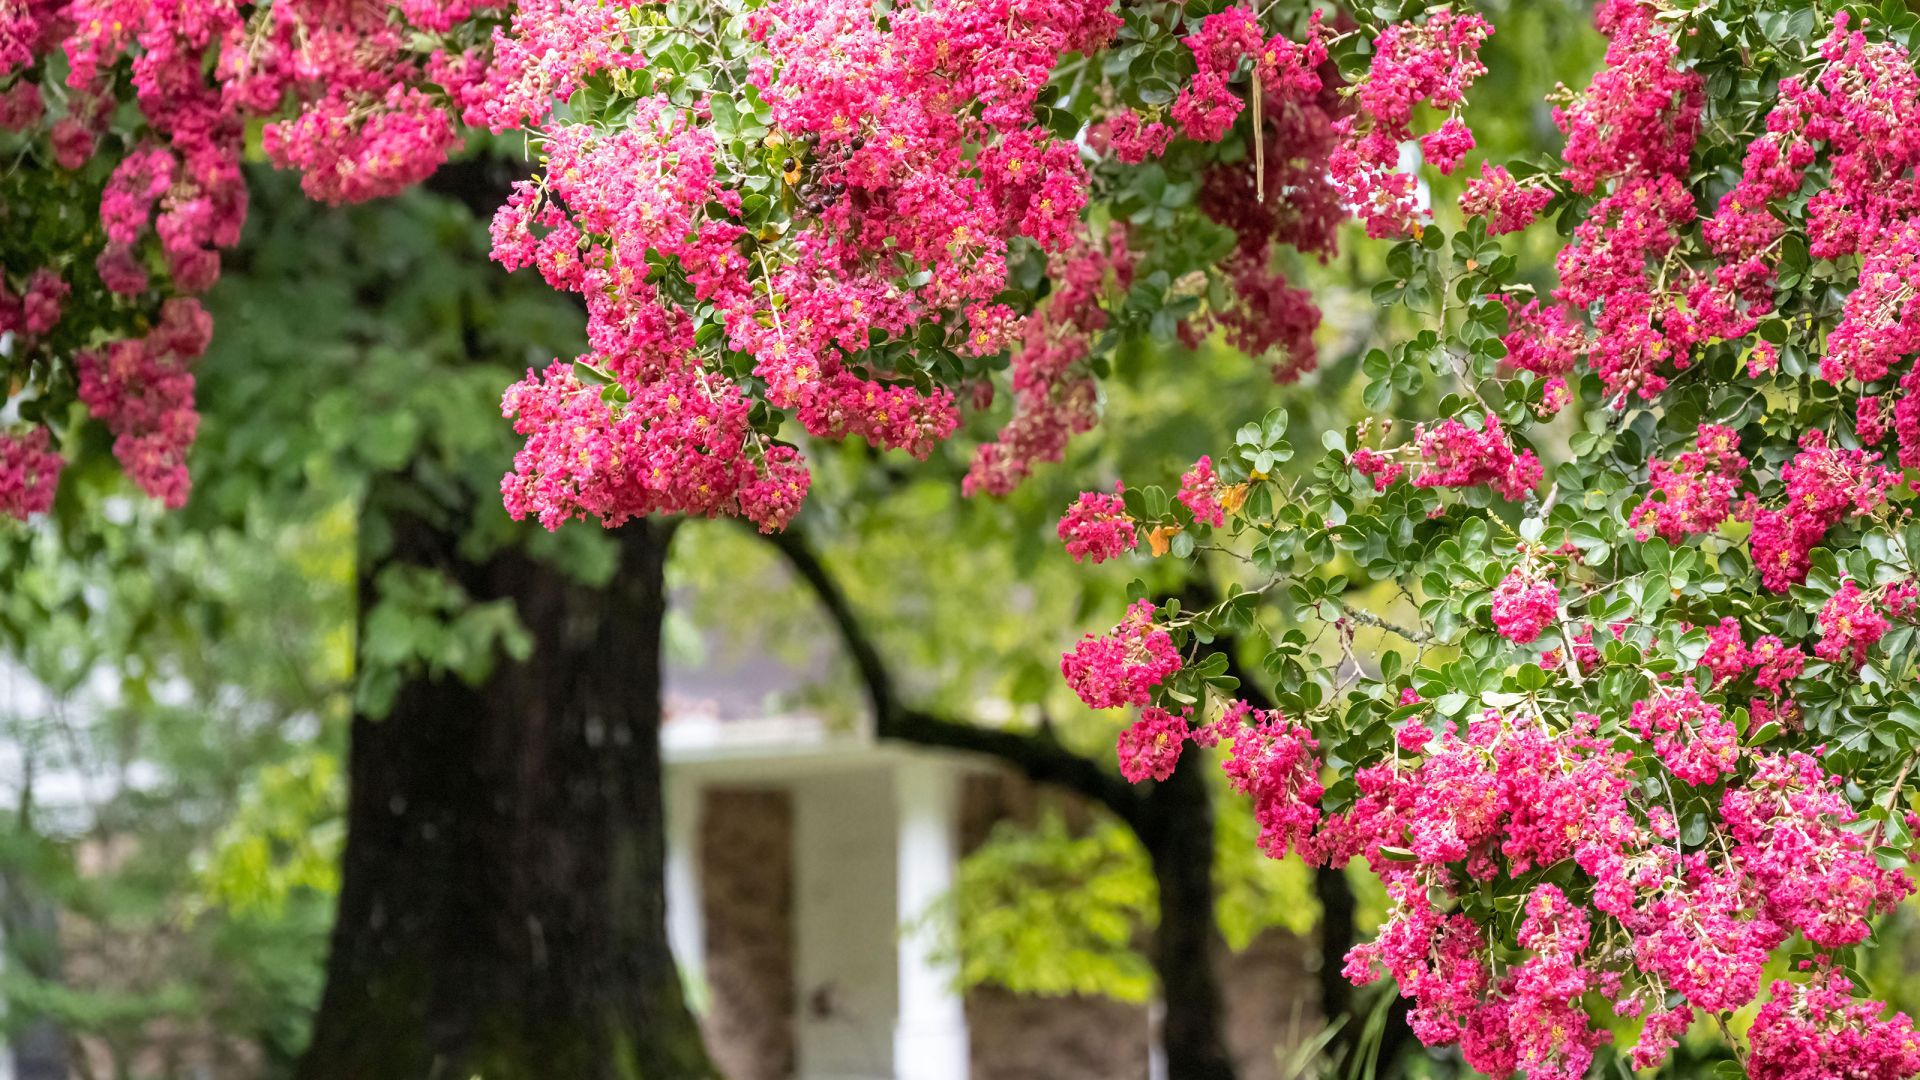 Best low maintenance trees: 11 easy options for plots big and small